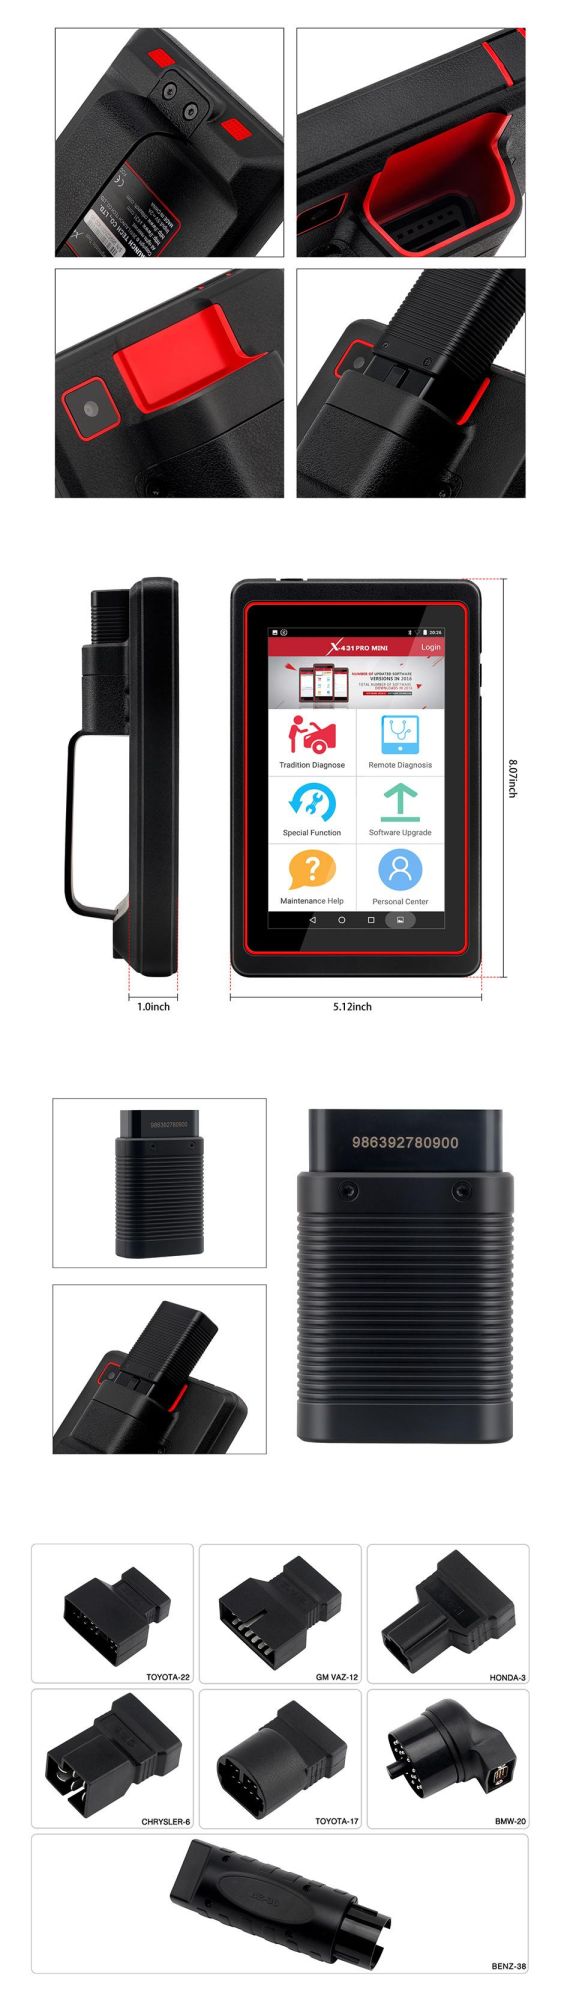 Launch X431 PRO Mini with Bluetooth/WiFi 2 Years Free Update Online Full System OBD2 Diagnostic Tool